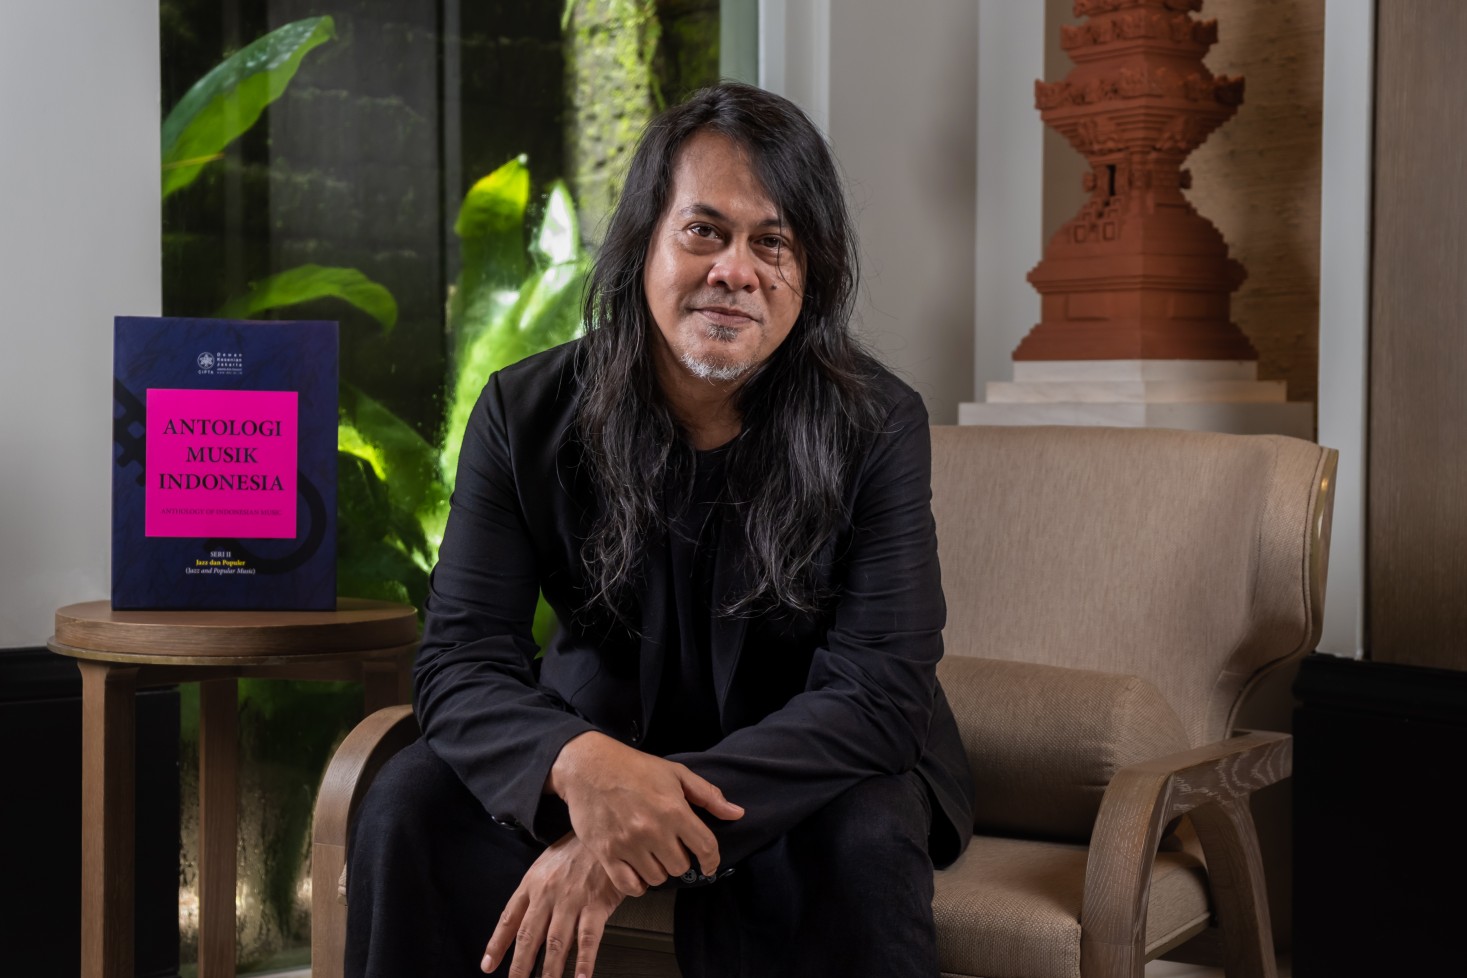 Anthology of Indonesian Music: The Apurva Kempinski Bali Launches New Immersive Musical Experience